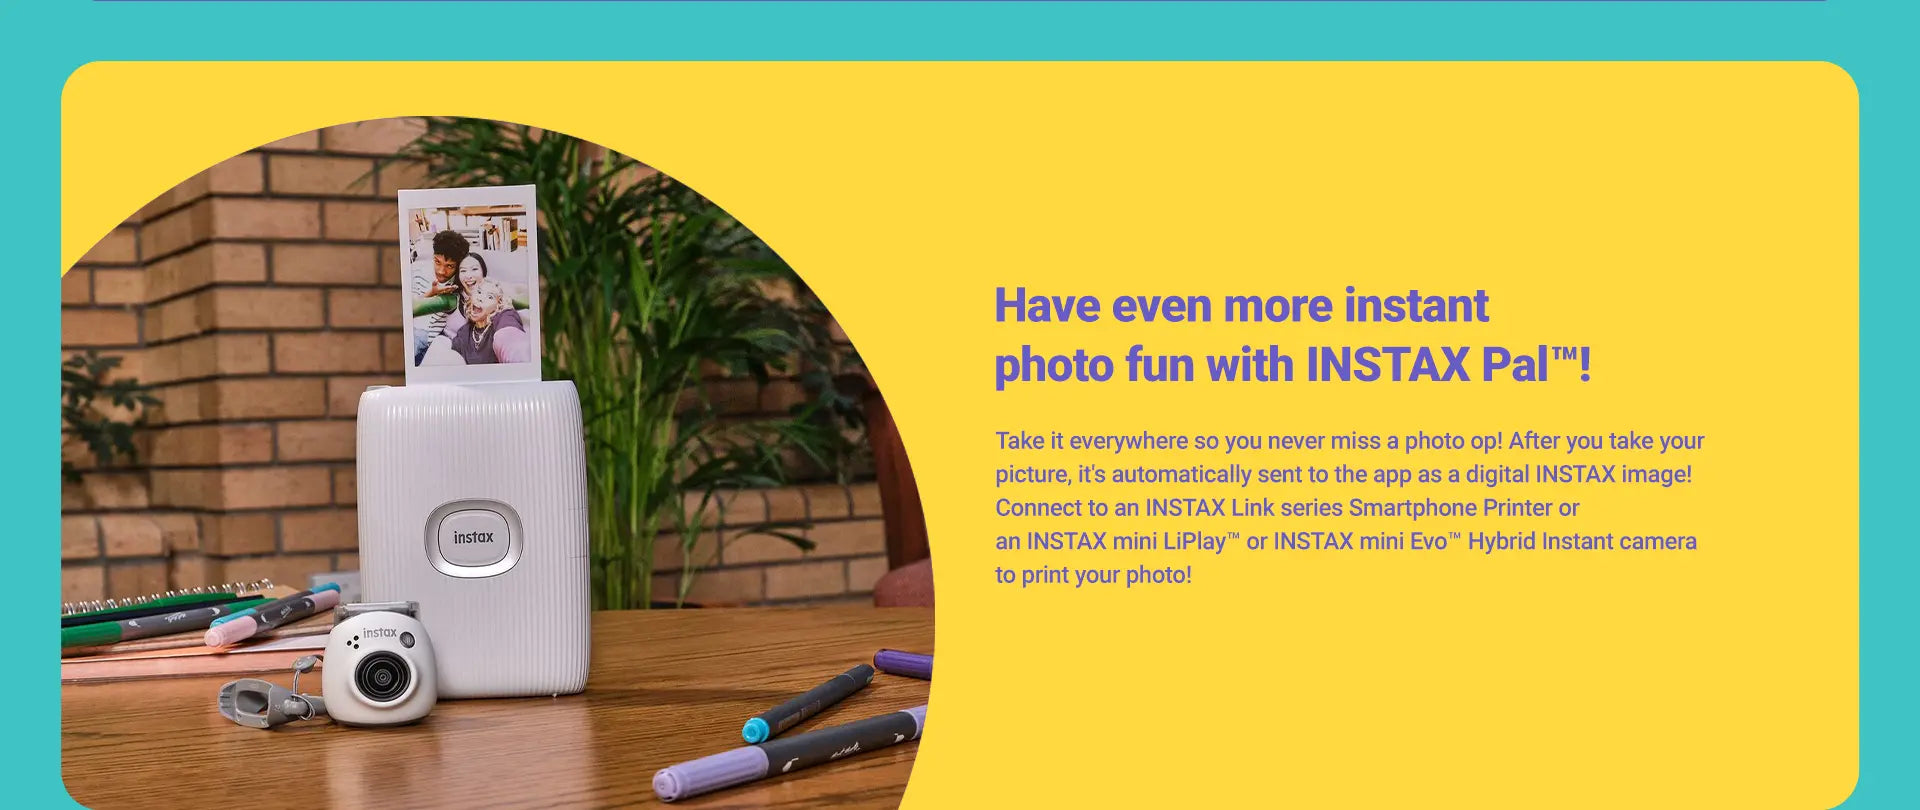 Instax Pal - Compatible with all Instax Smarphone Printers